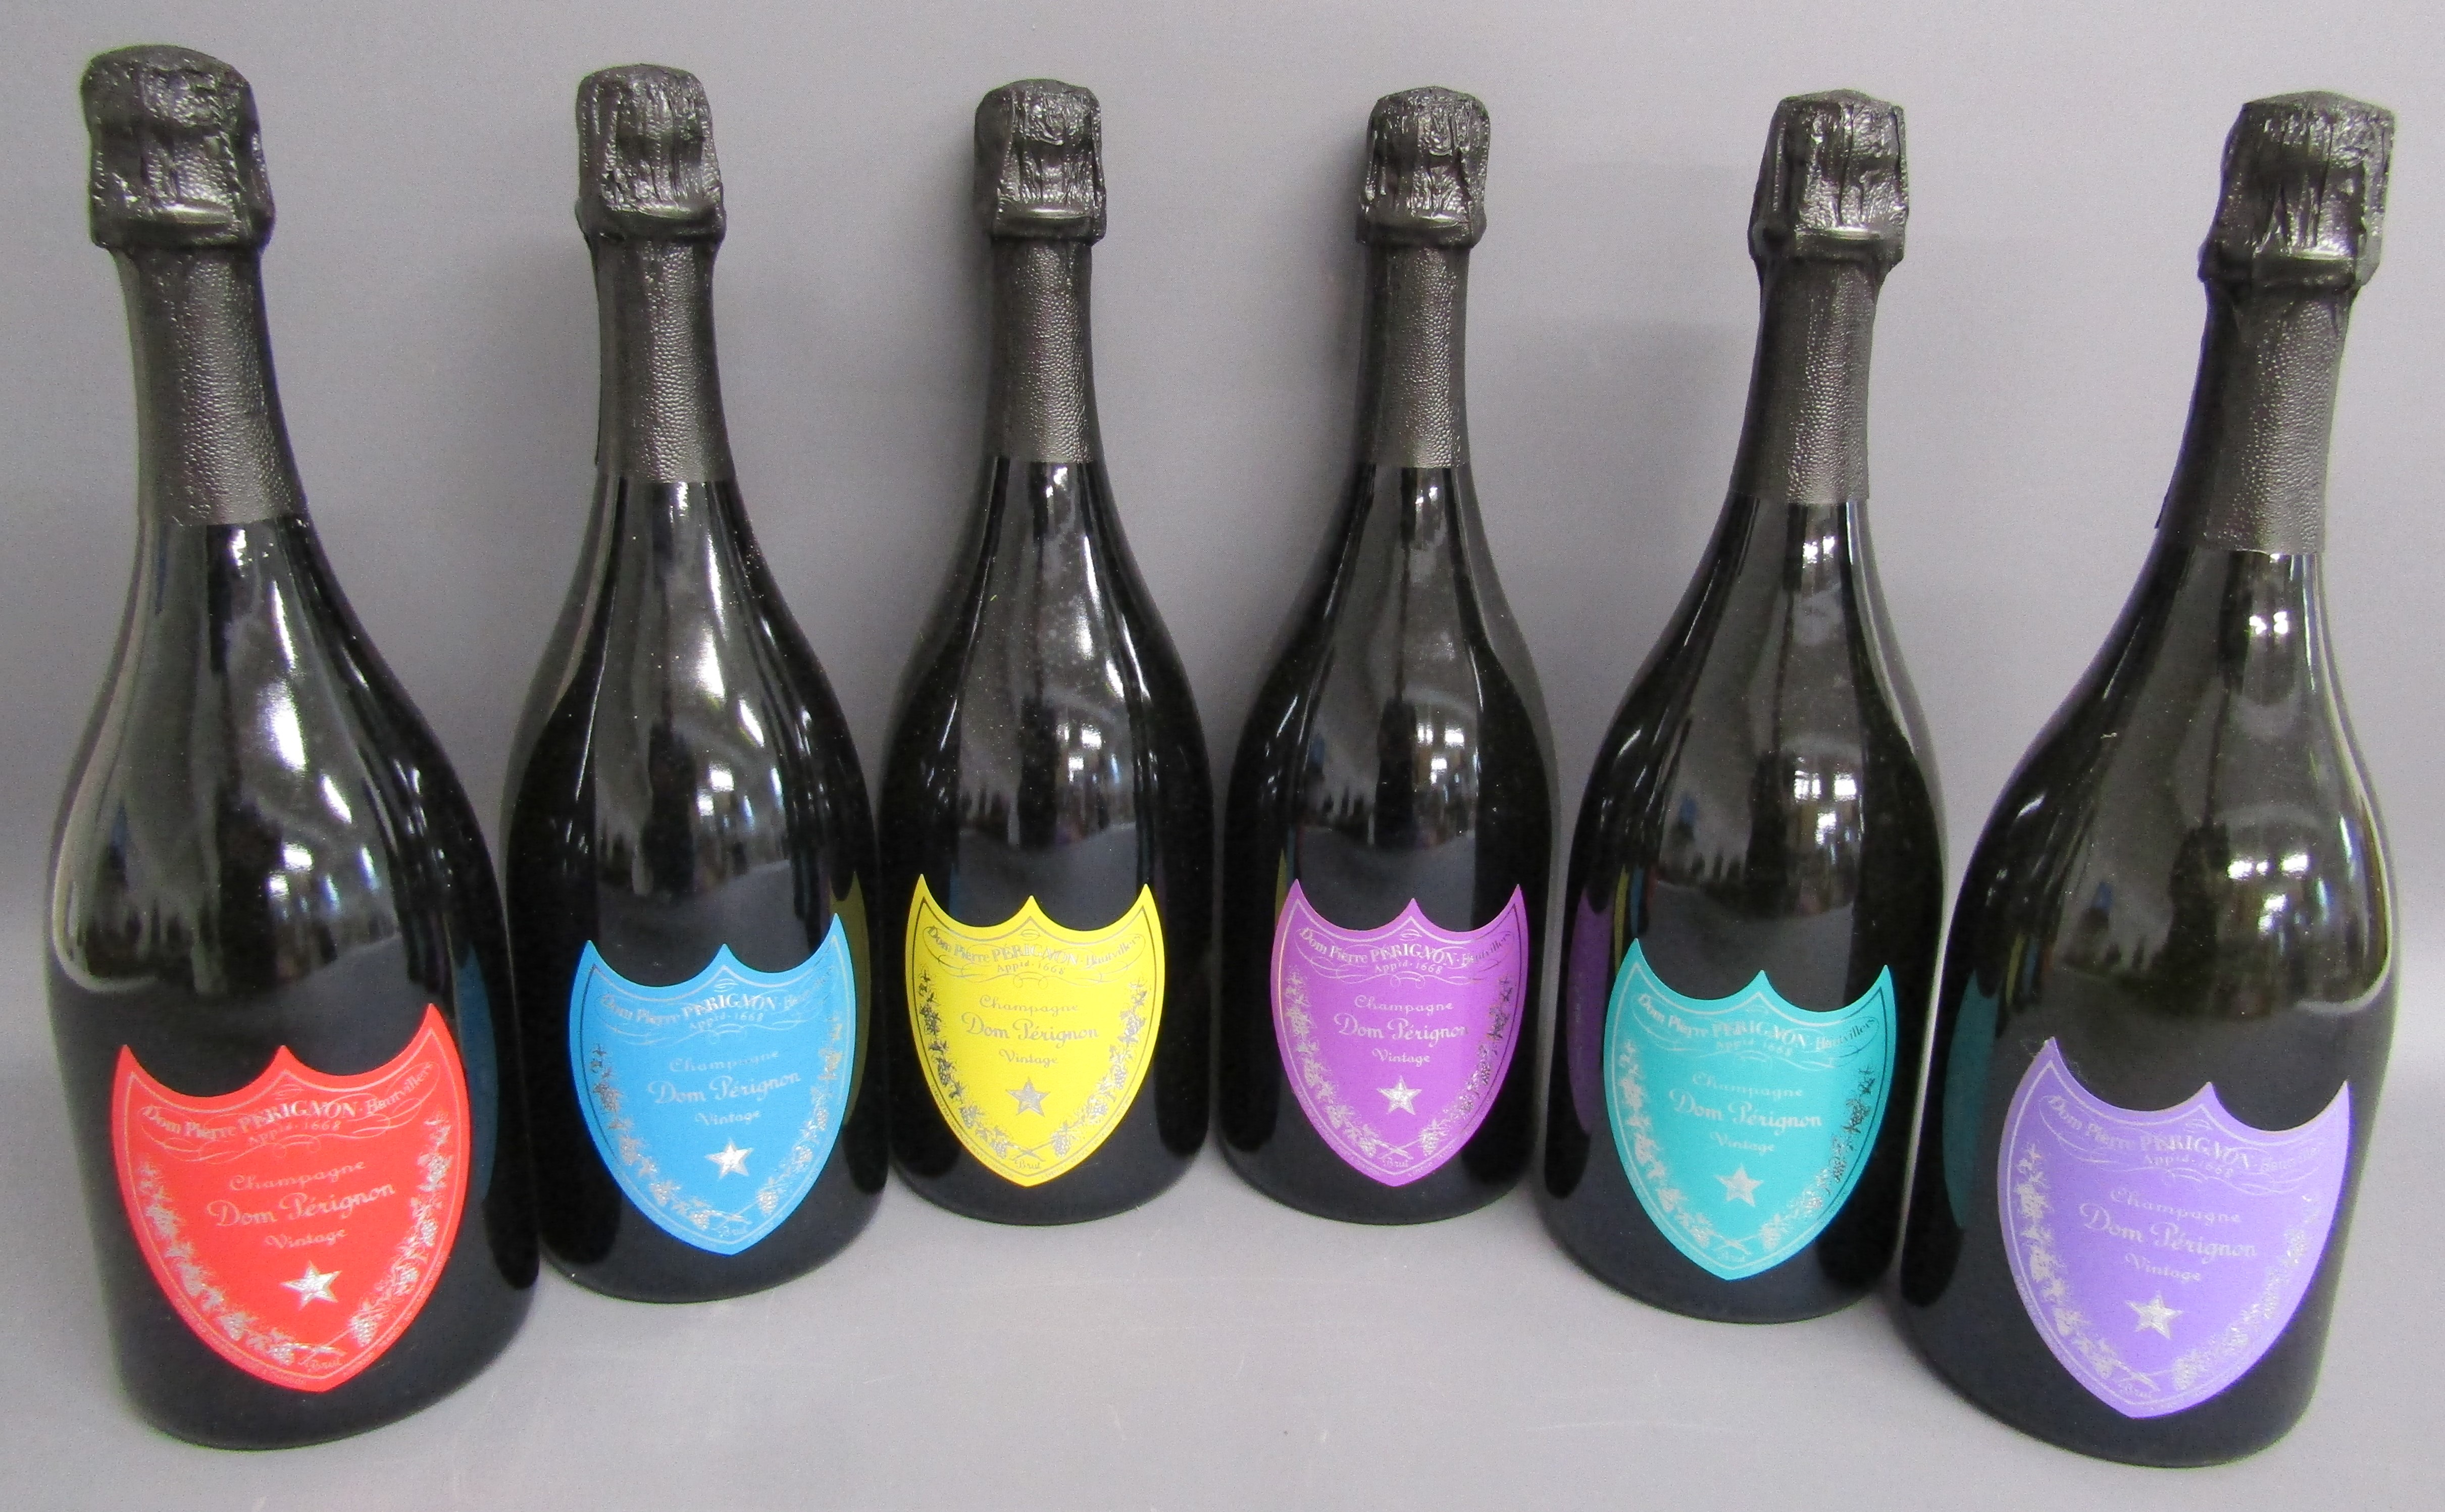 Set of 6 Andy Warhol Tribute Collection Dom Perignon display bottles (empty)